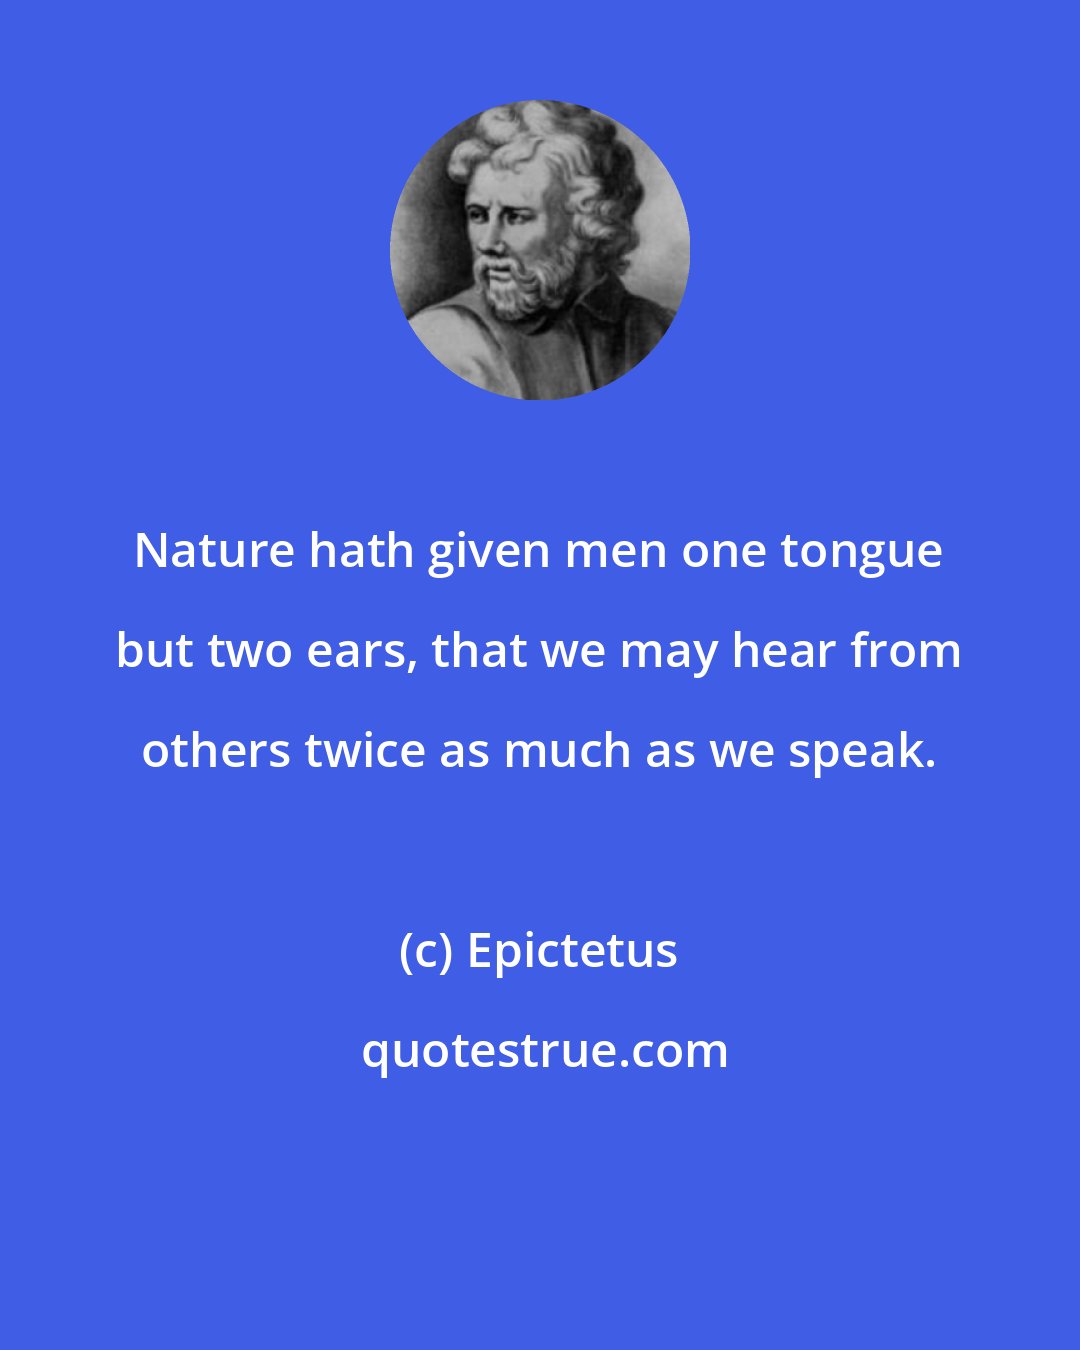 Epictetus: Nature hath given men one tongue but two ears, that we may hear from others twice as much as we speak.